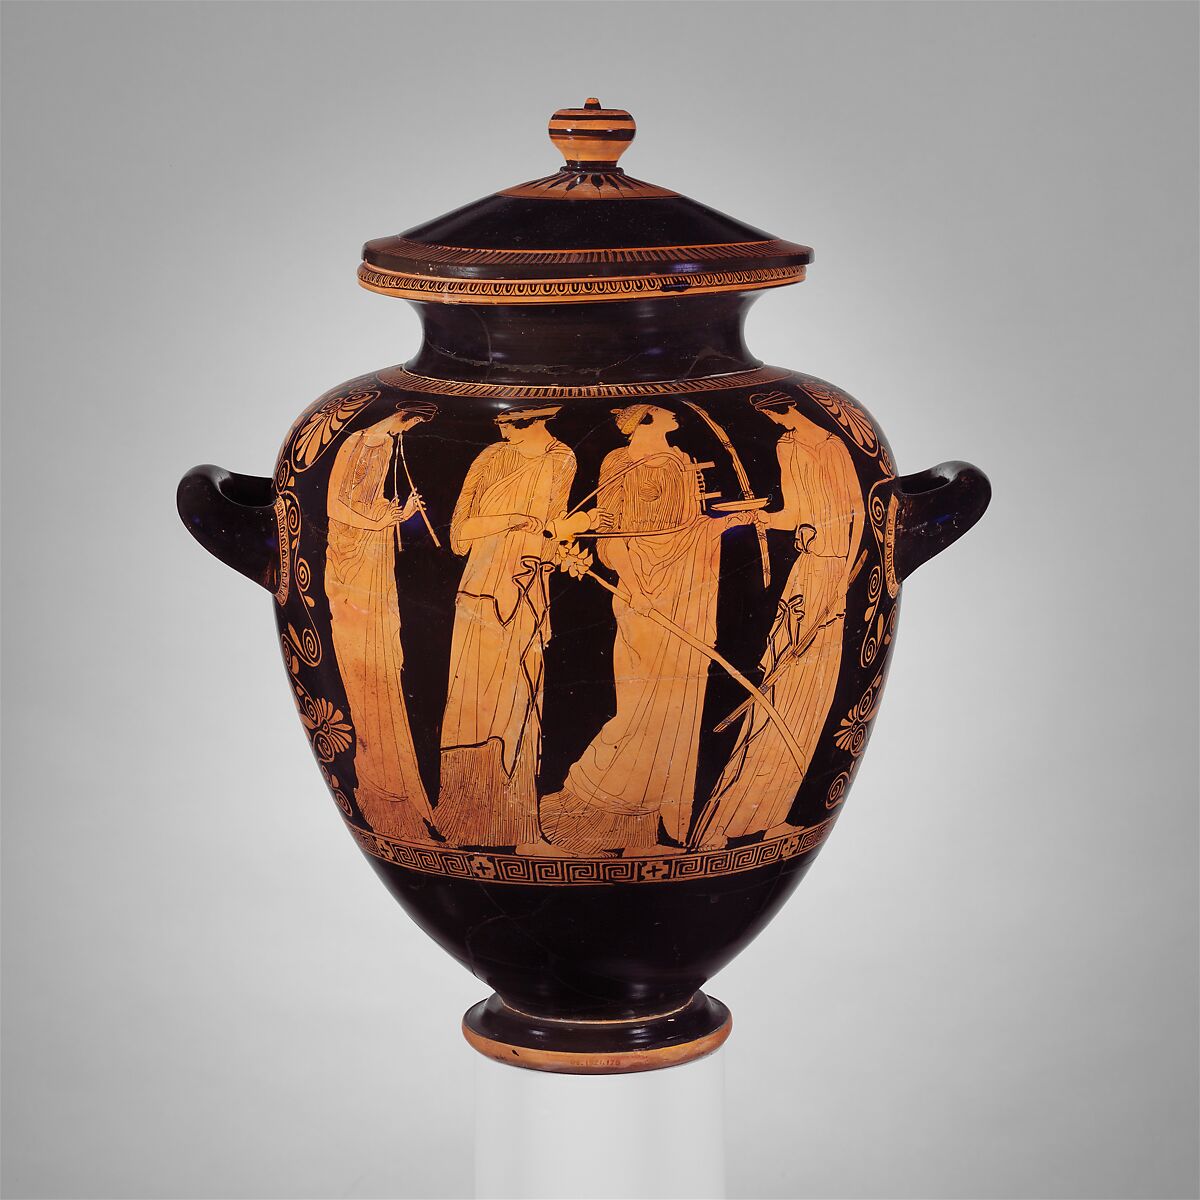 Terracotta lid of a stamnos (jar), Attributed to the Menelaos Painter, Terracotta, Greek, Attic 